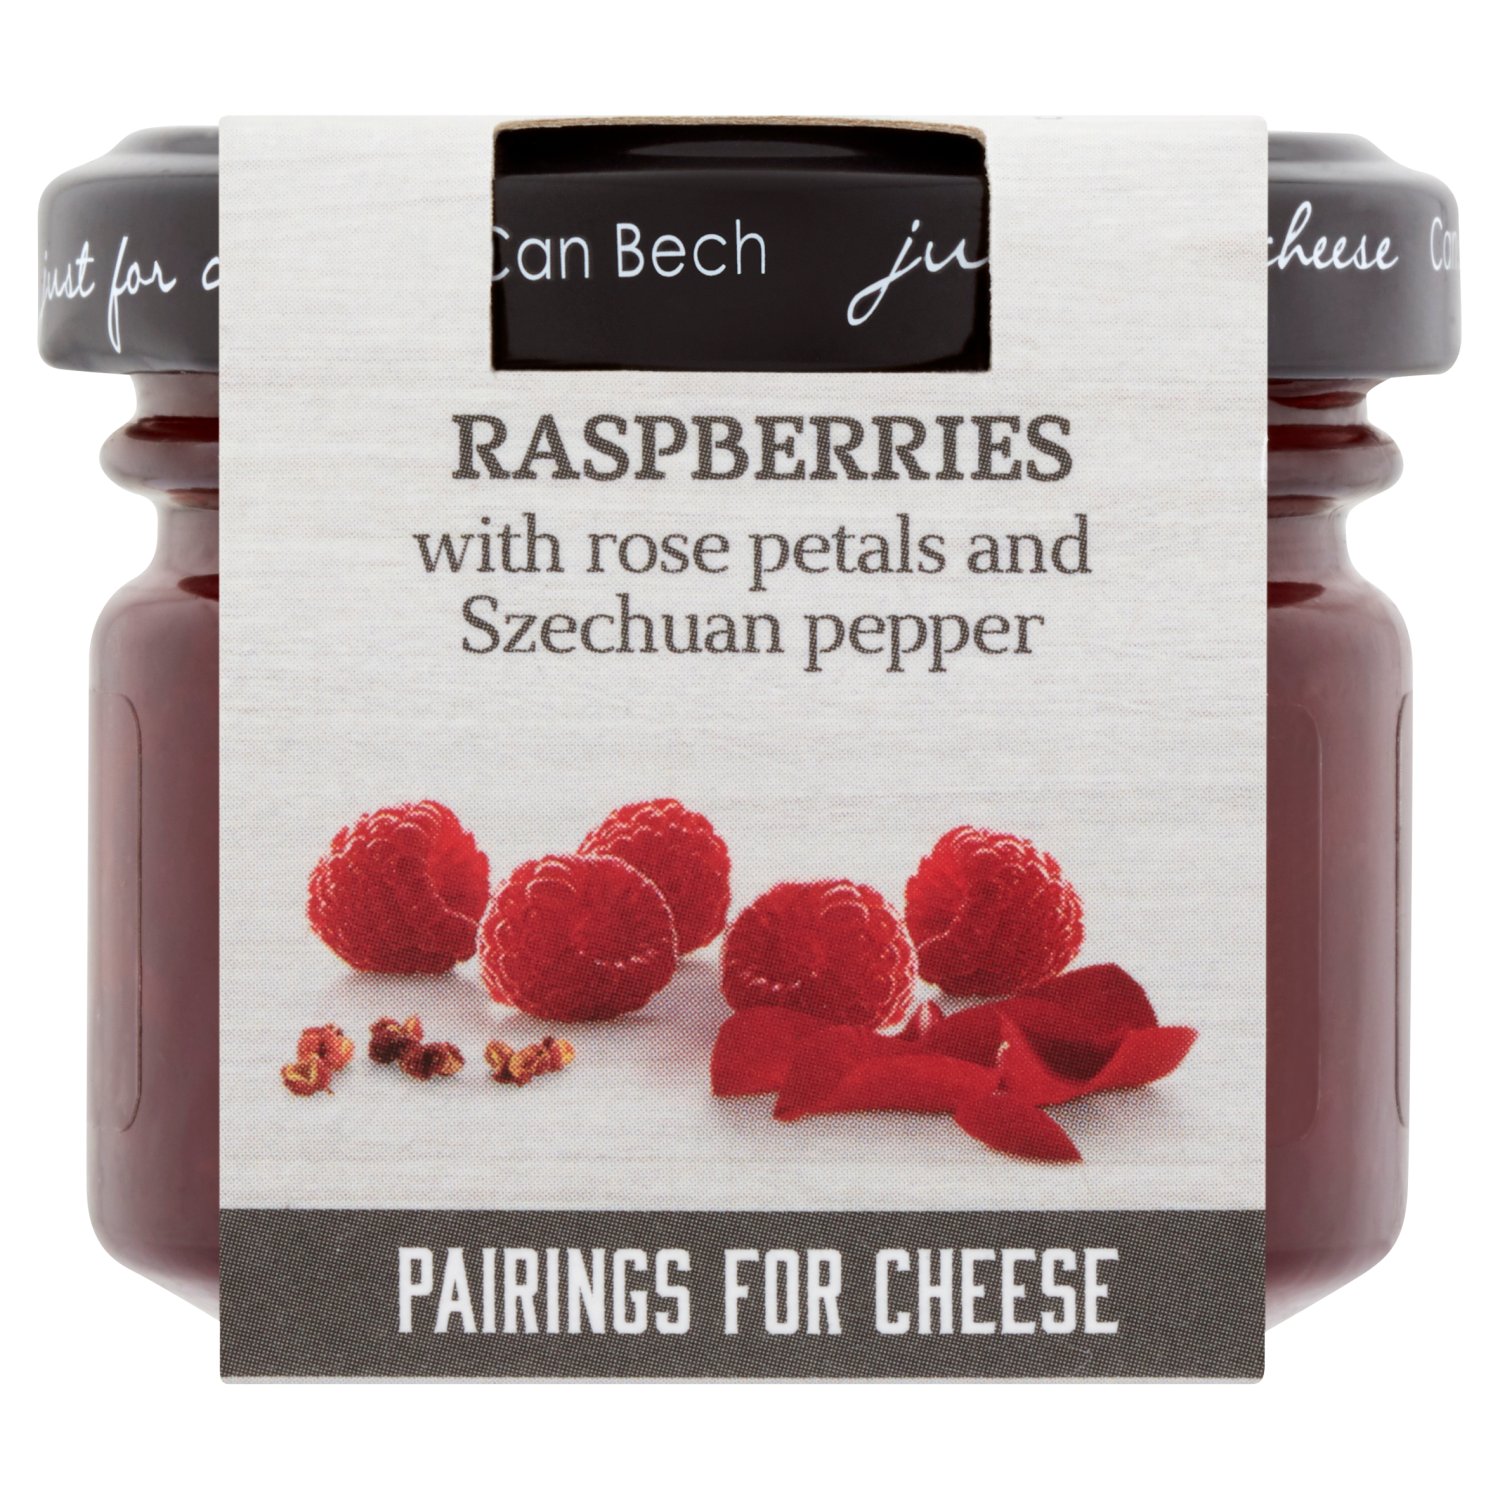 Can Bech Just For Cheese Raspberries Pairings (70 g)